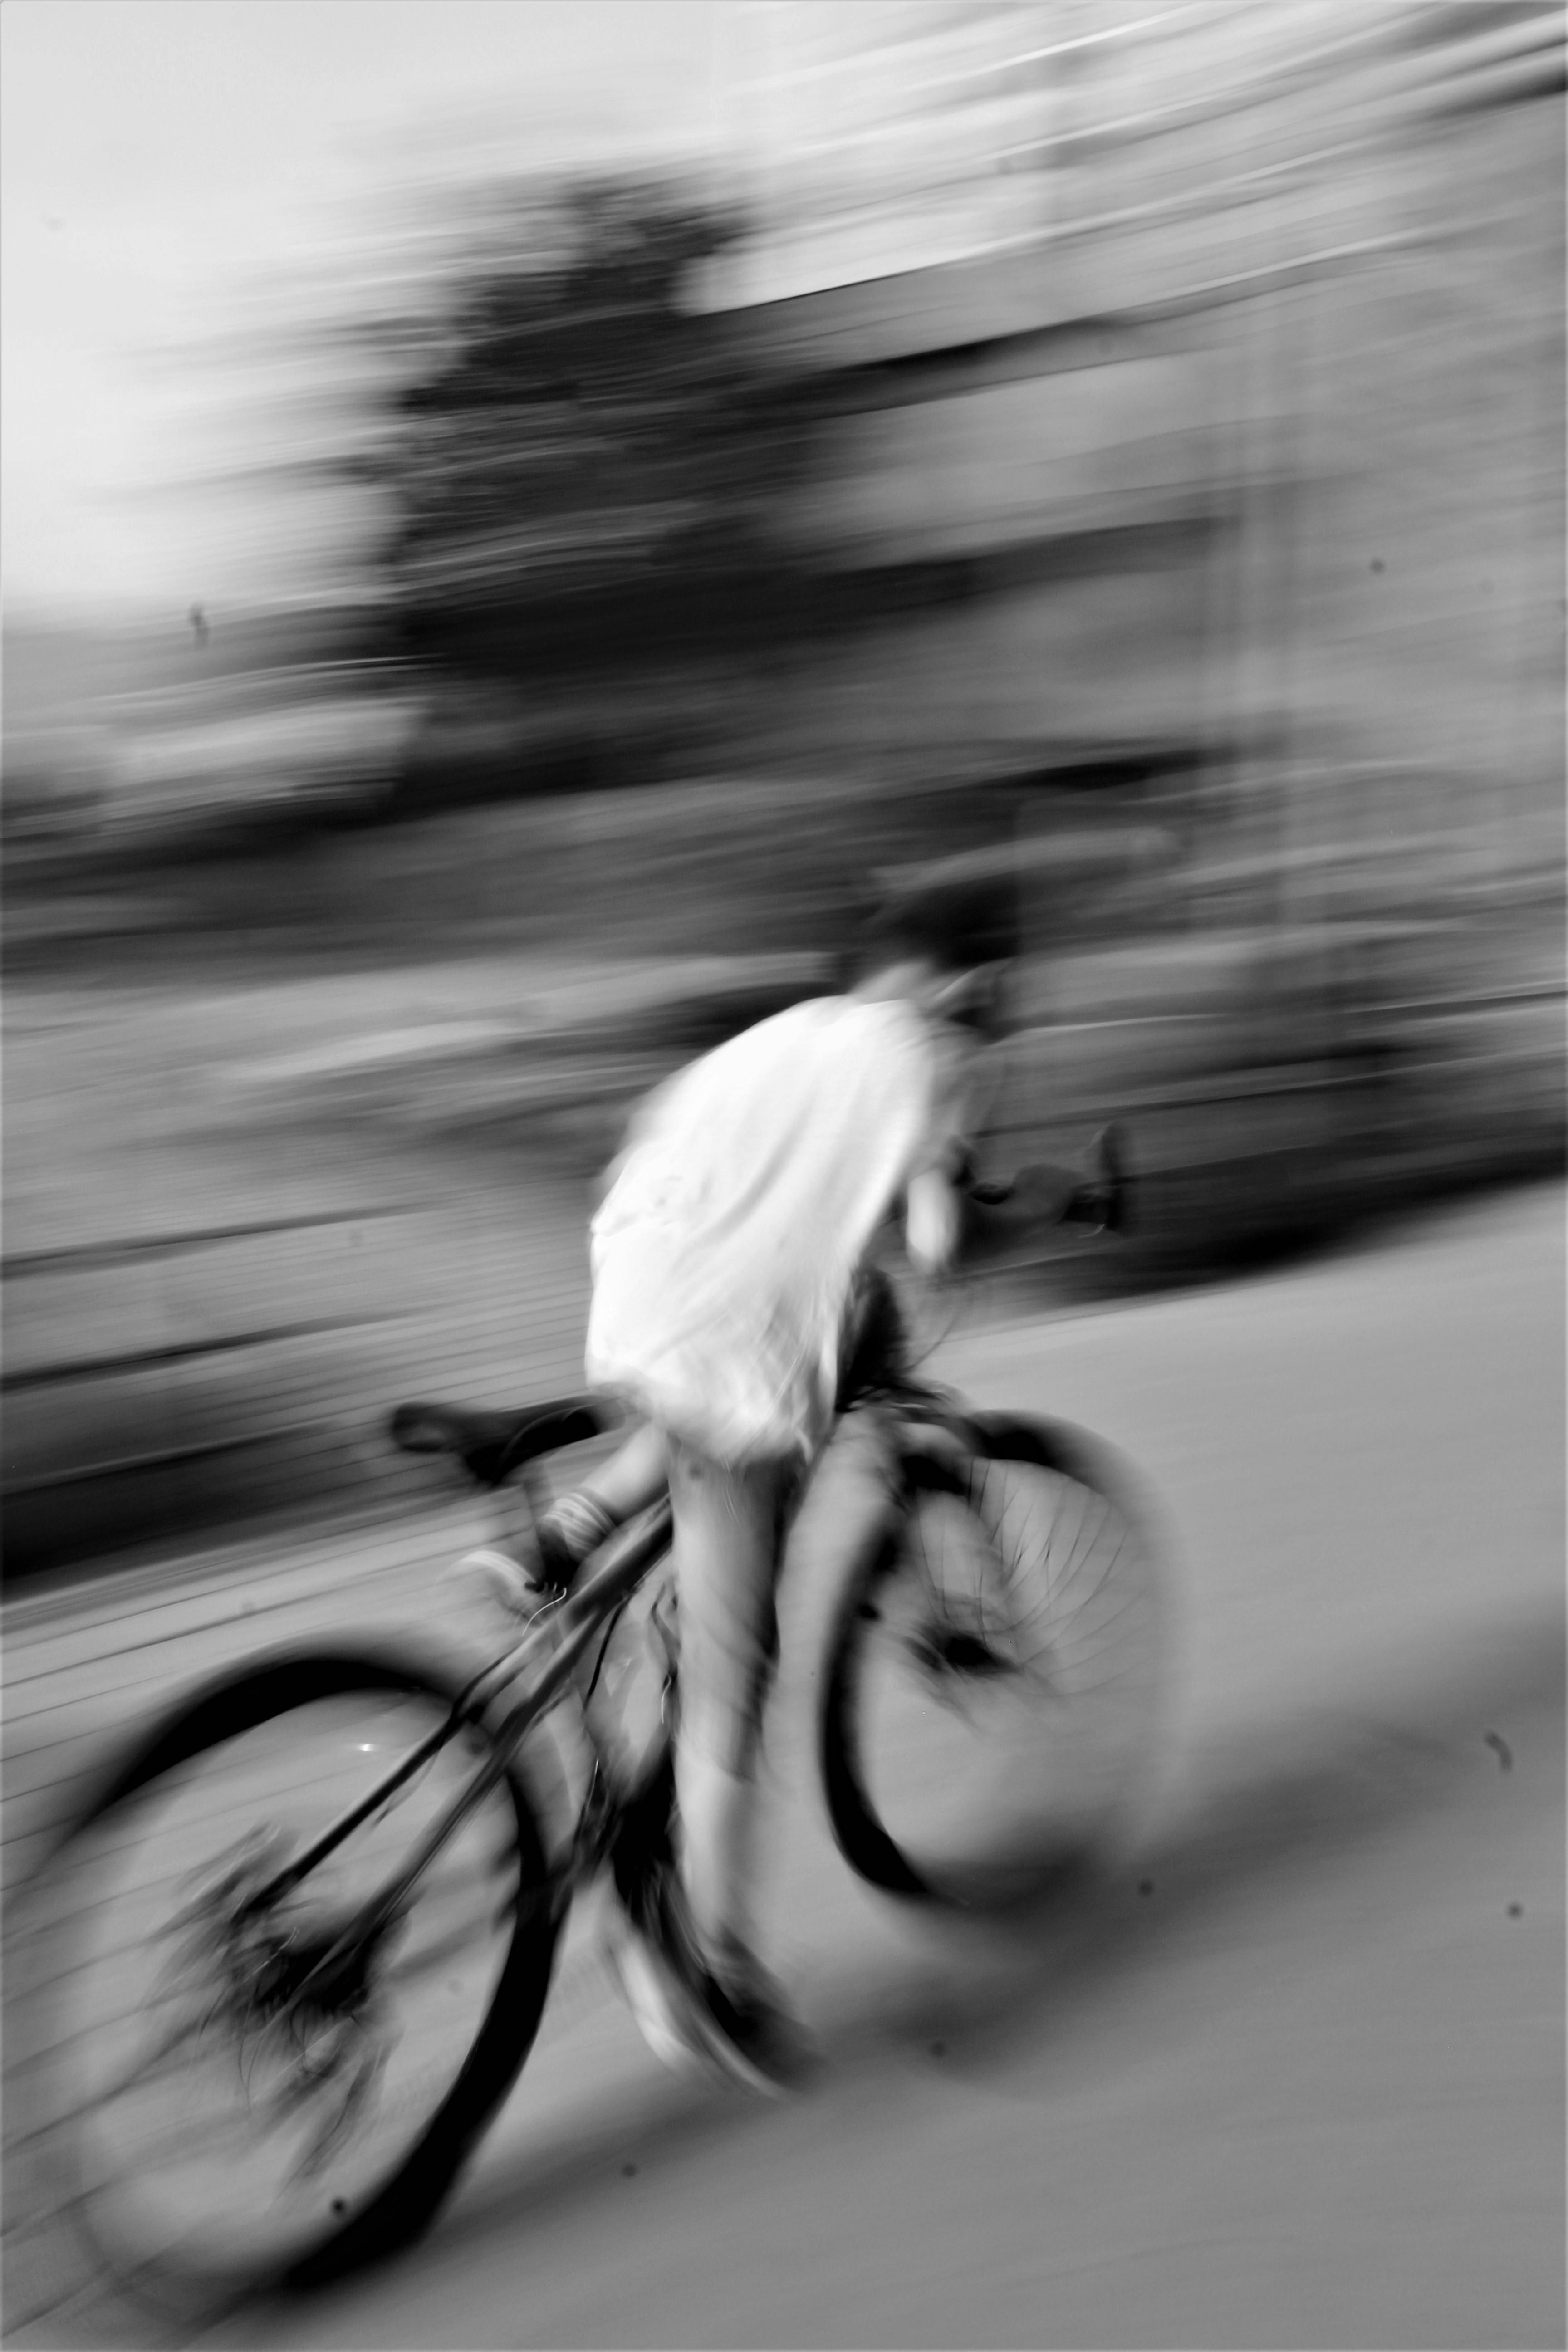 grayscale photography of person riding bicycle